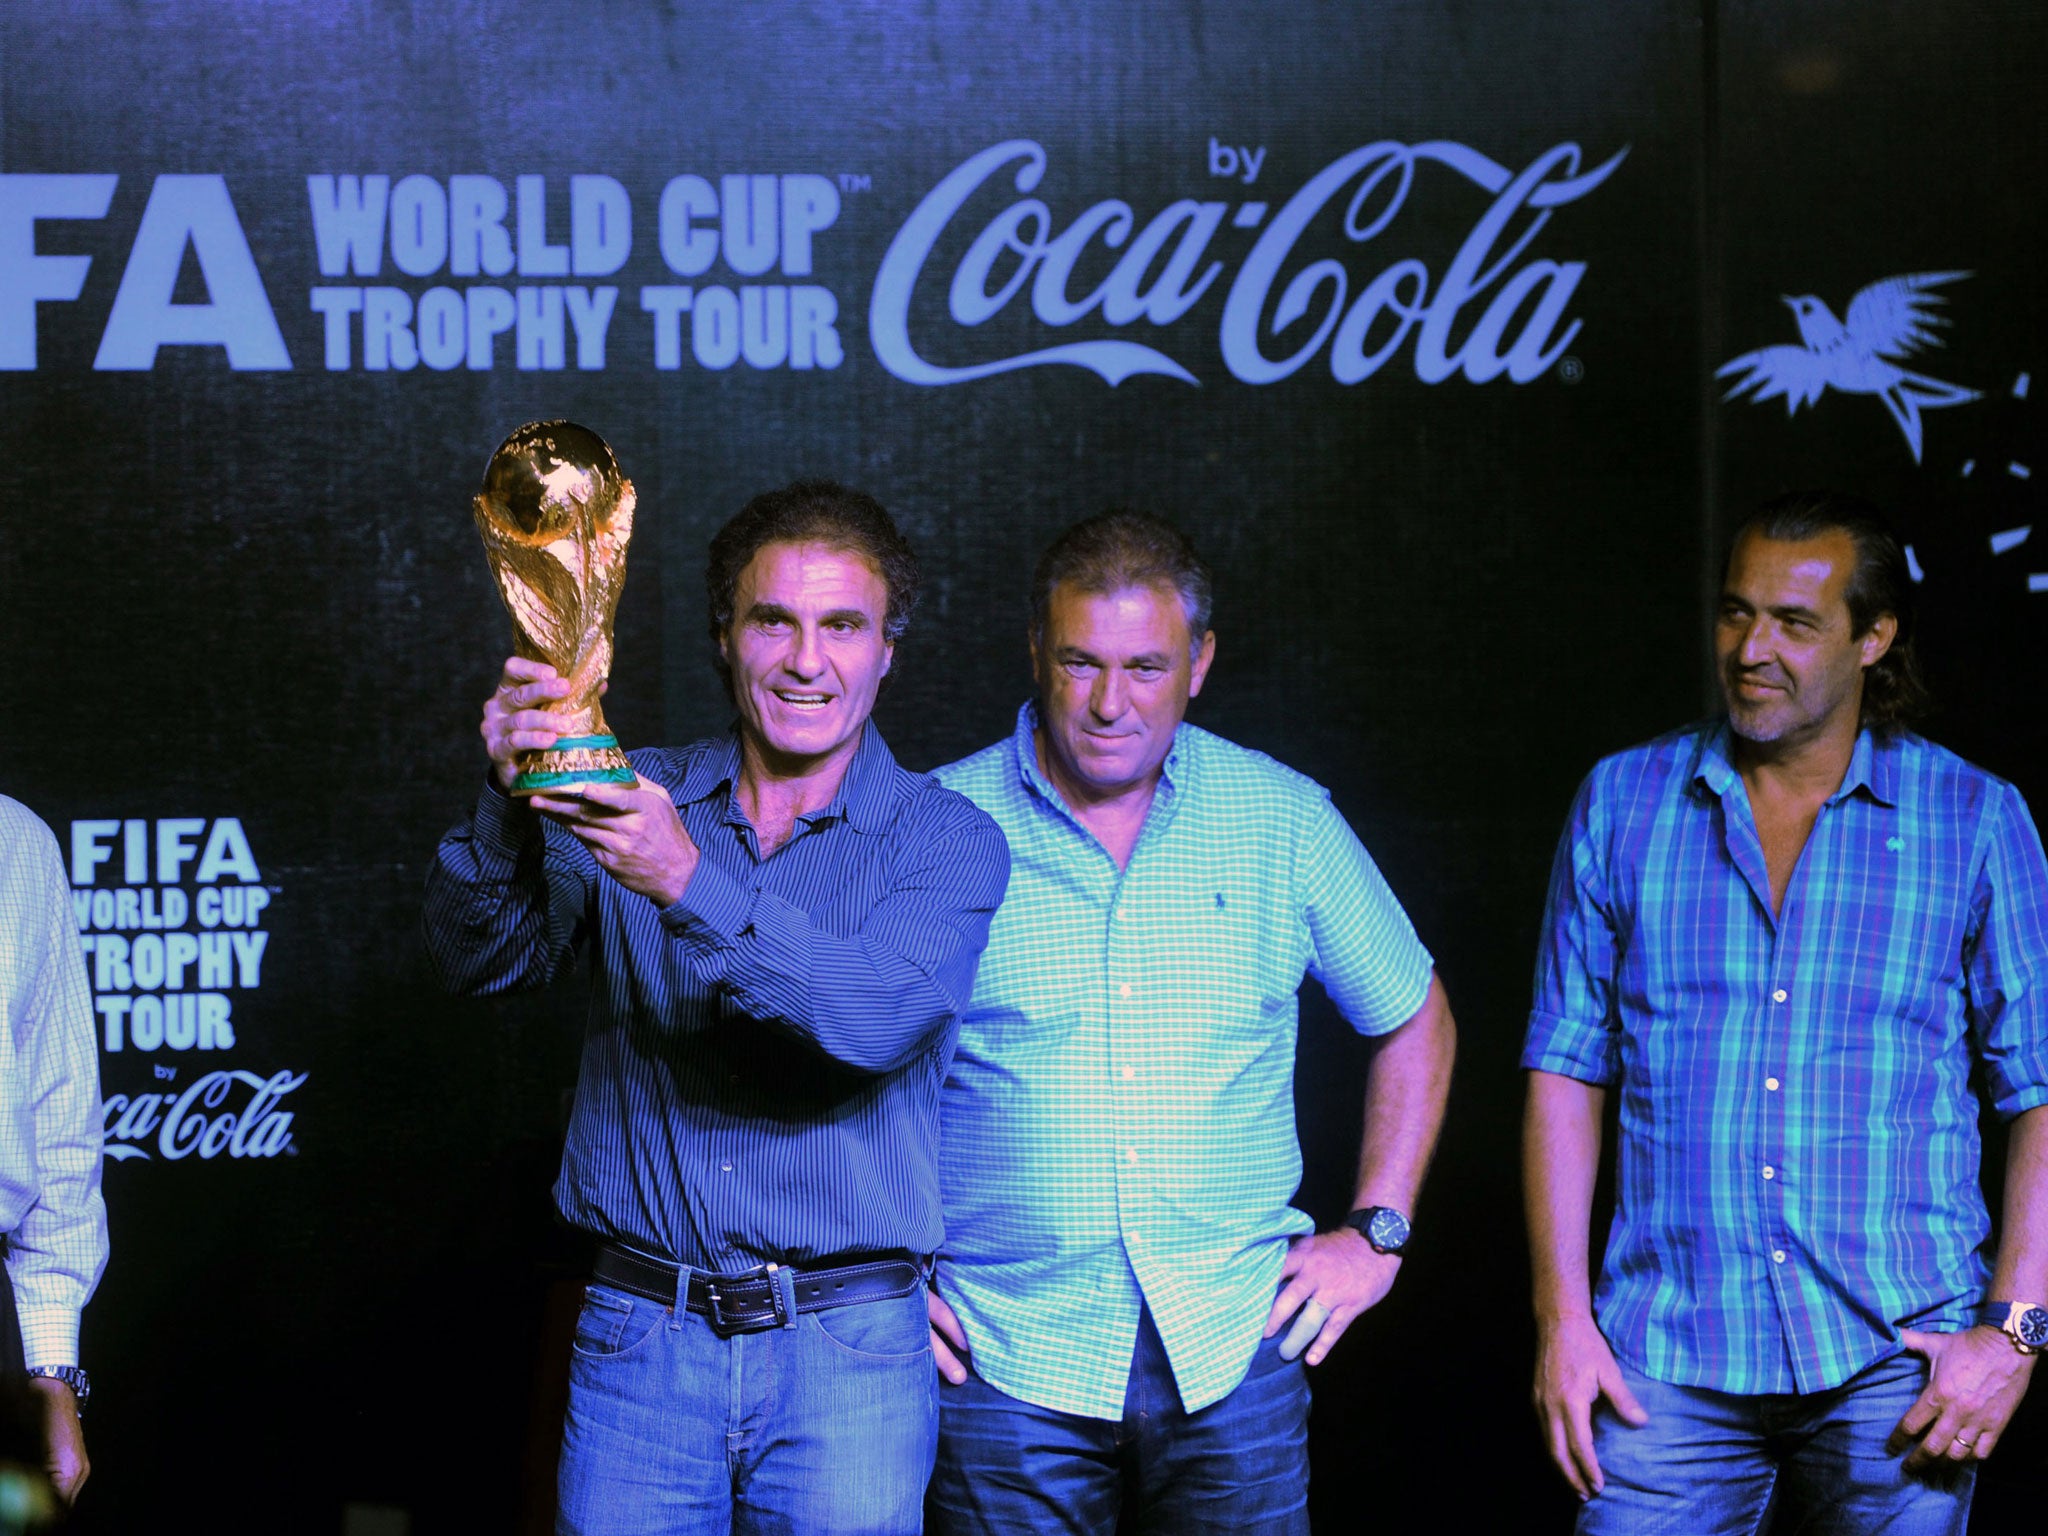 World Cup 2014 Official anthem 'The World Is Ours' unveiled by Coca